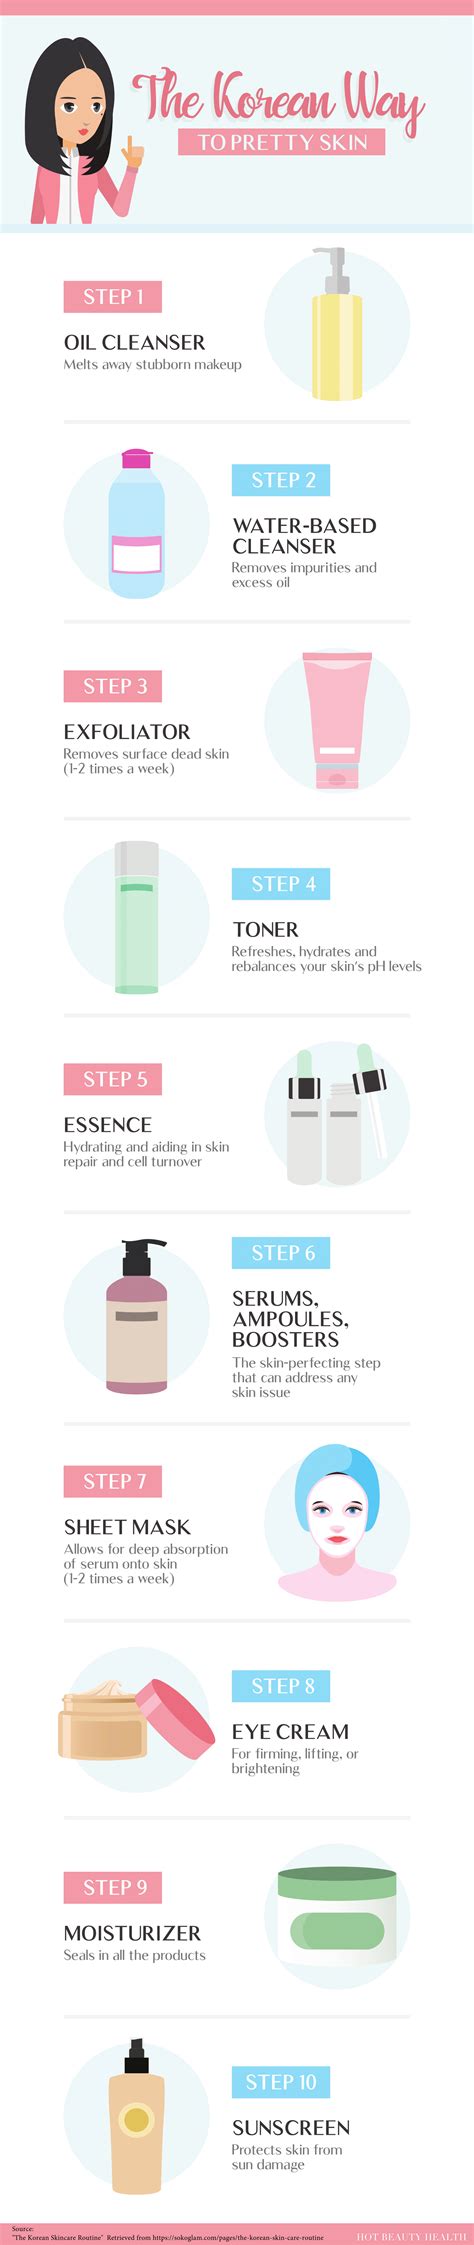 The 10 Step Korean Skincare Routine Beauty And Health